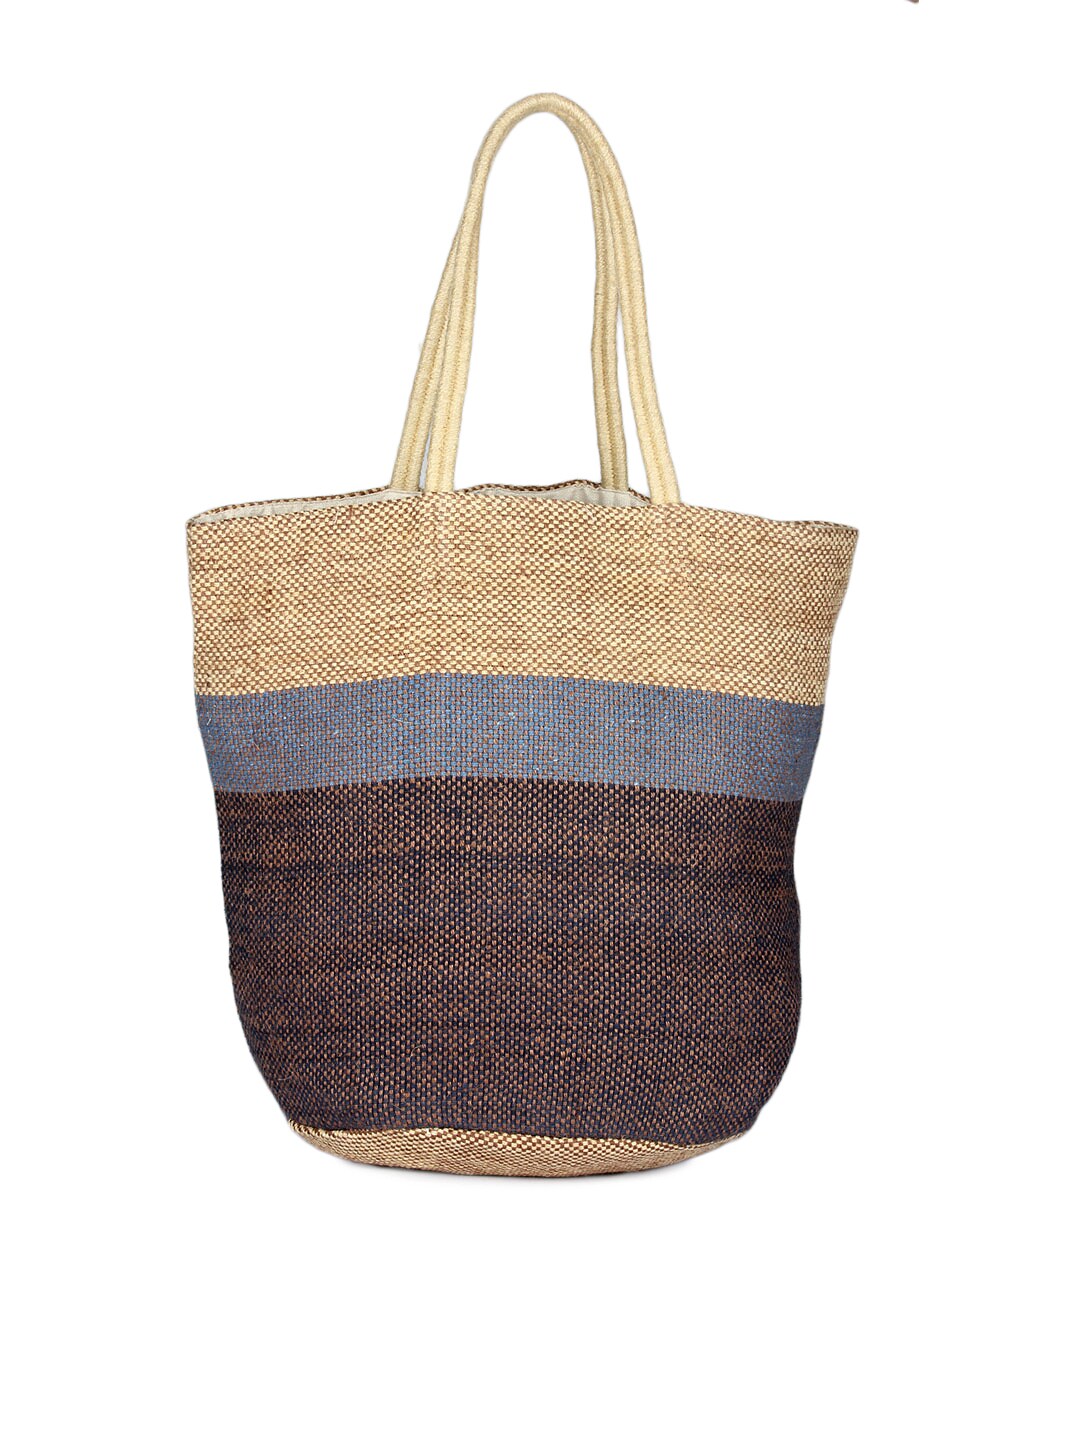 French Connection Brown Colourblocked Tote Bag